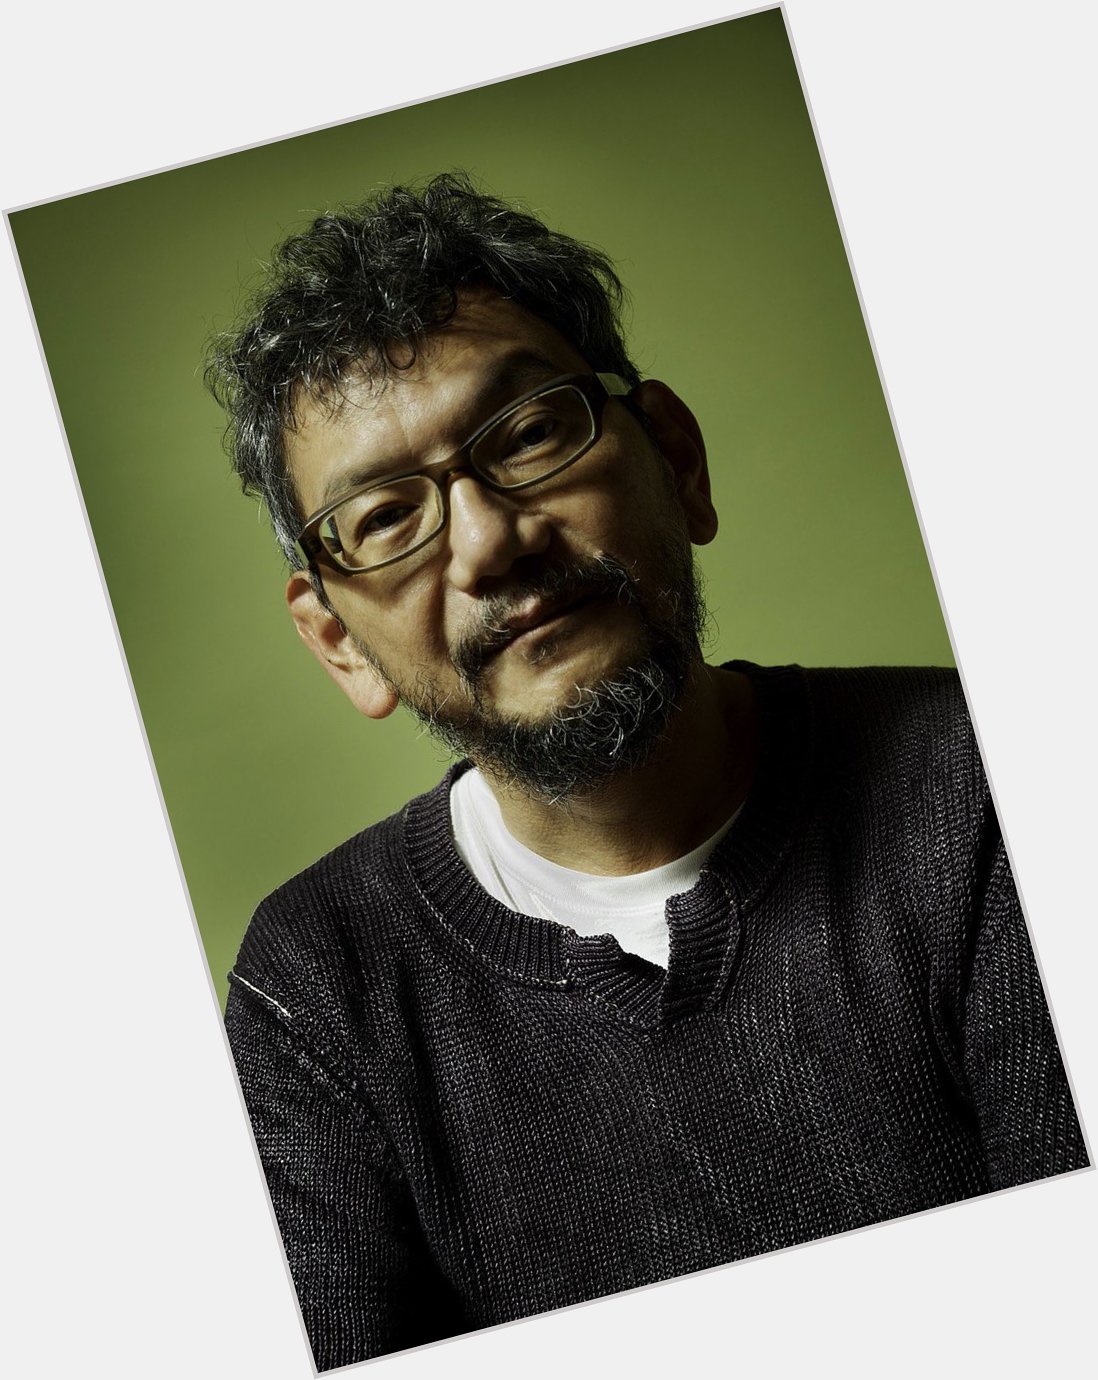 Happy birthday to Hideaki Anno and many more 